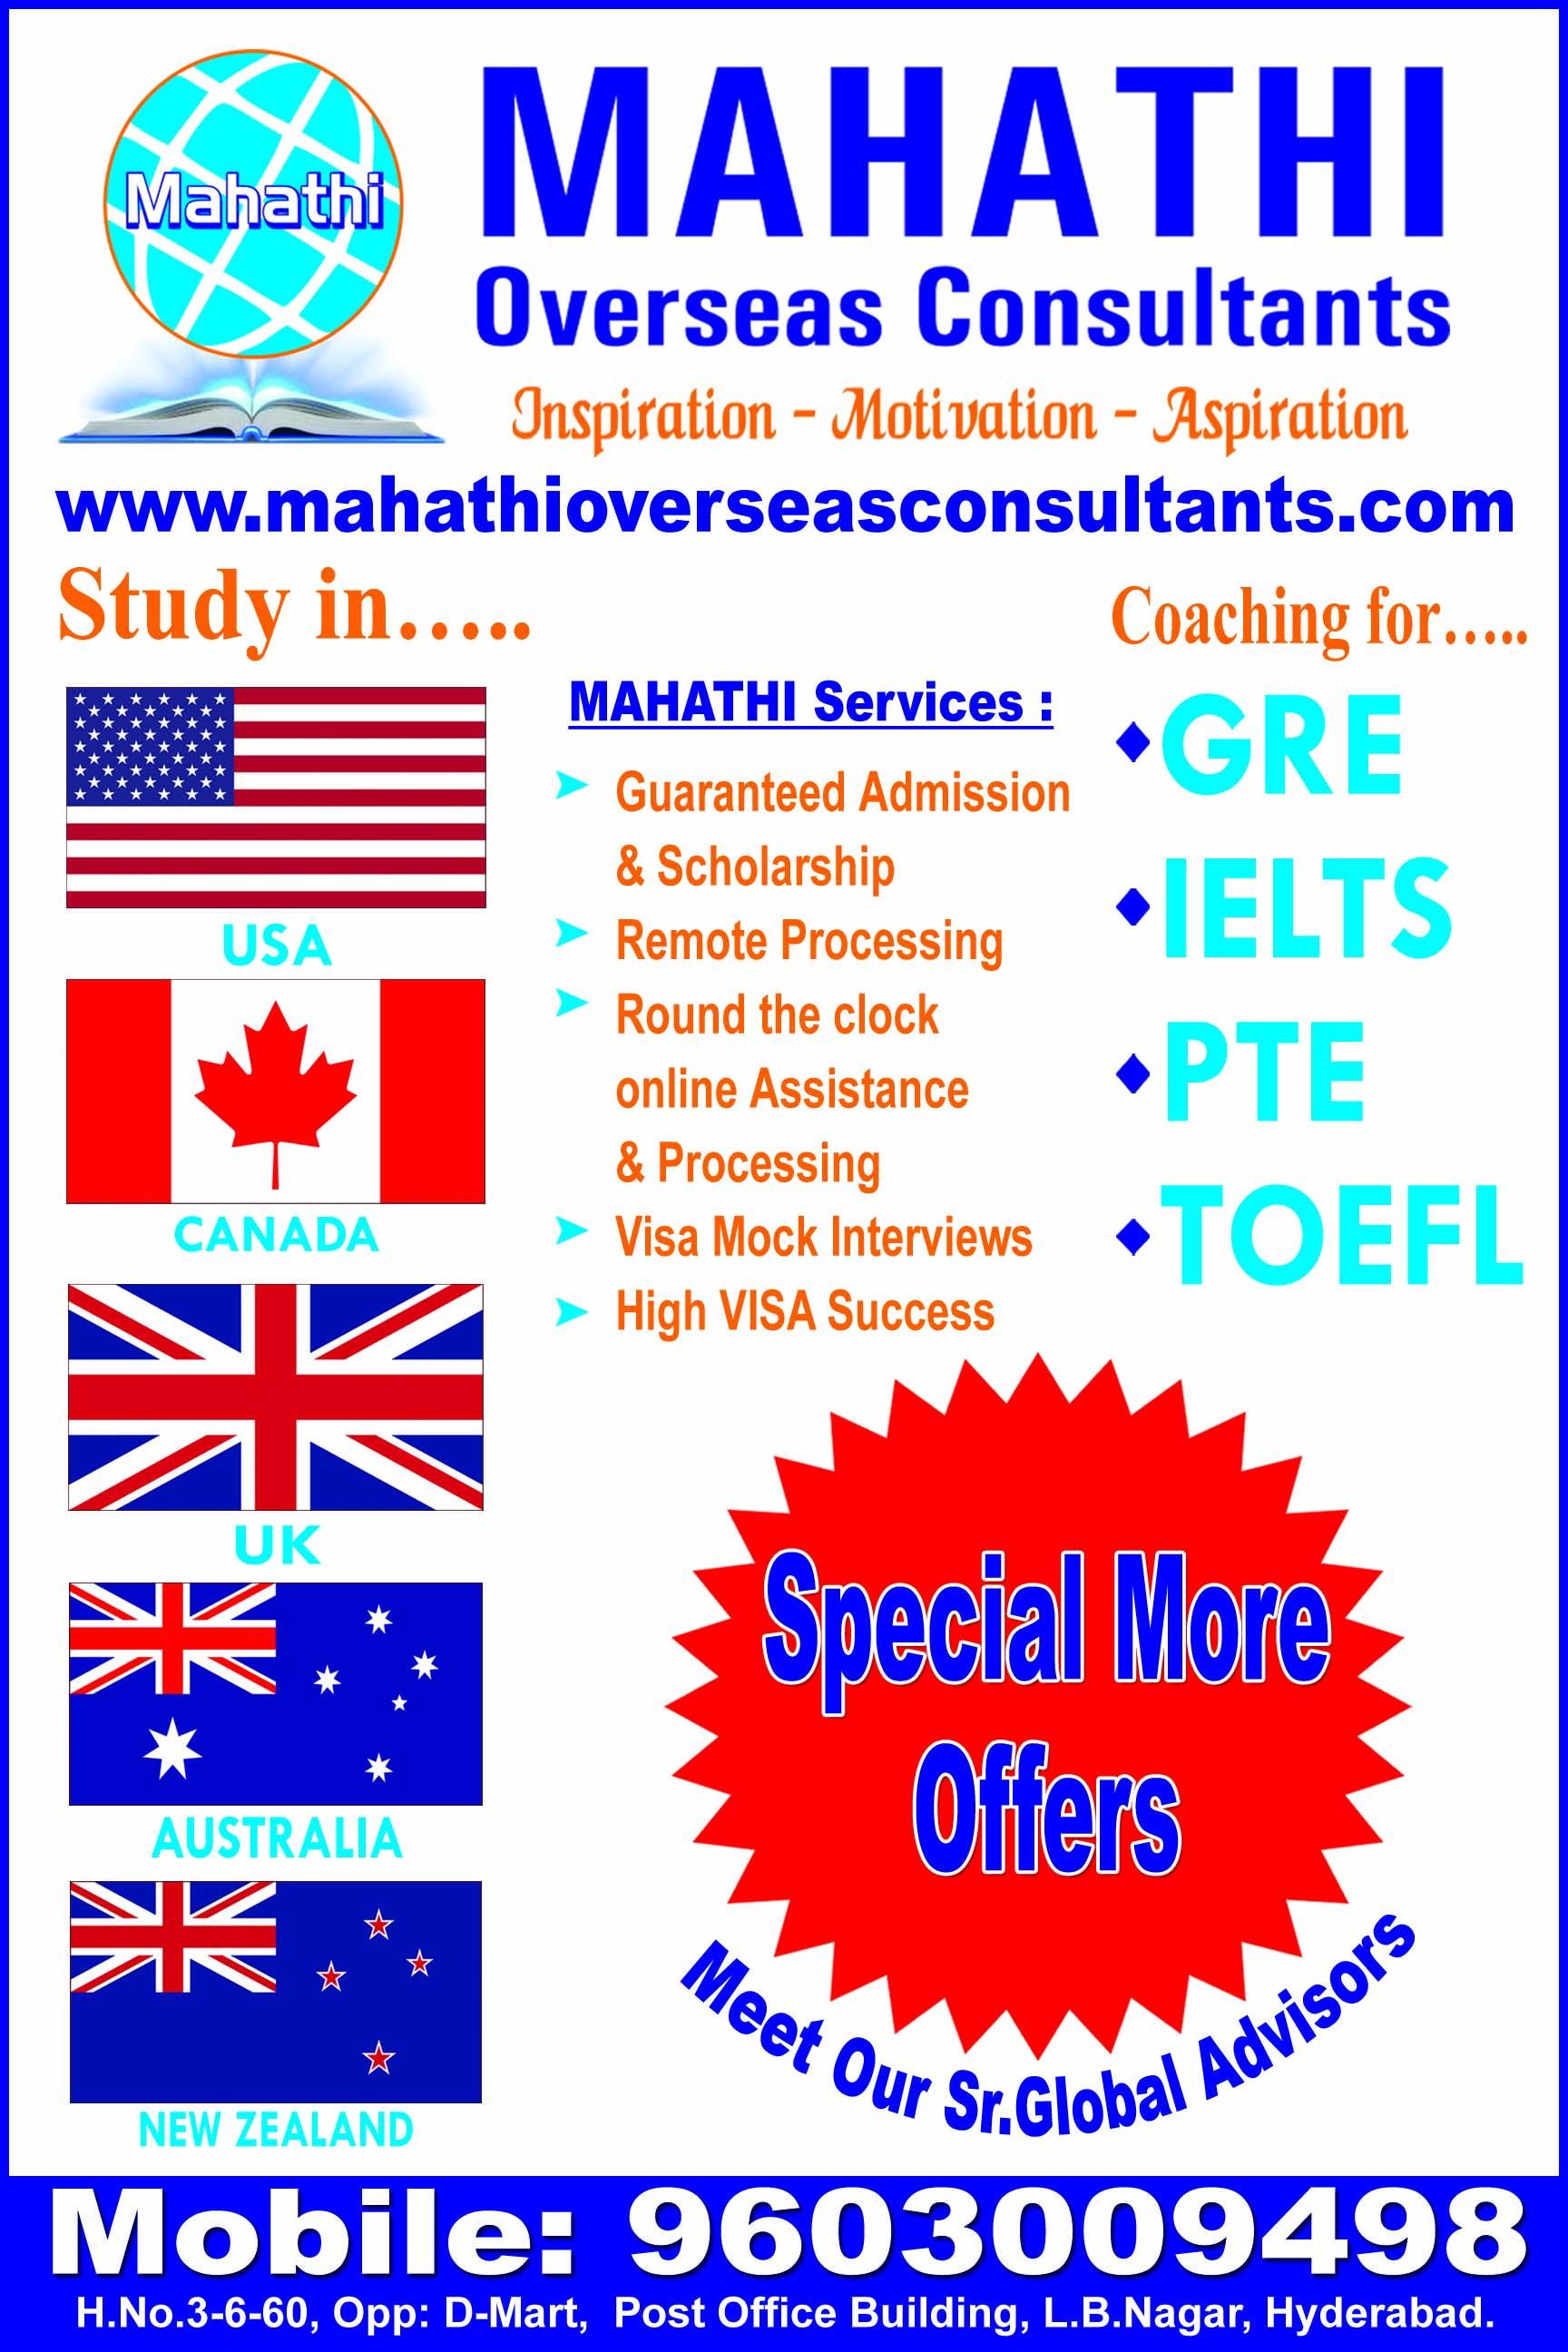 Mahathi-Reach us to fulfill your dreamsServicesEverything ElseAll Indiaother